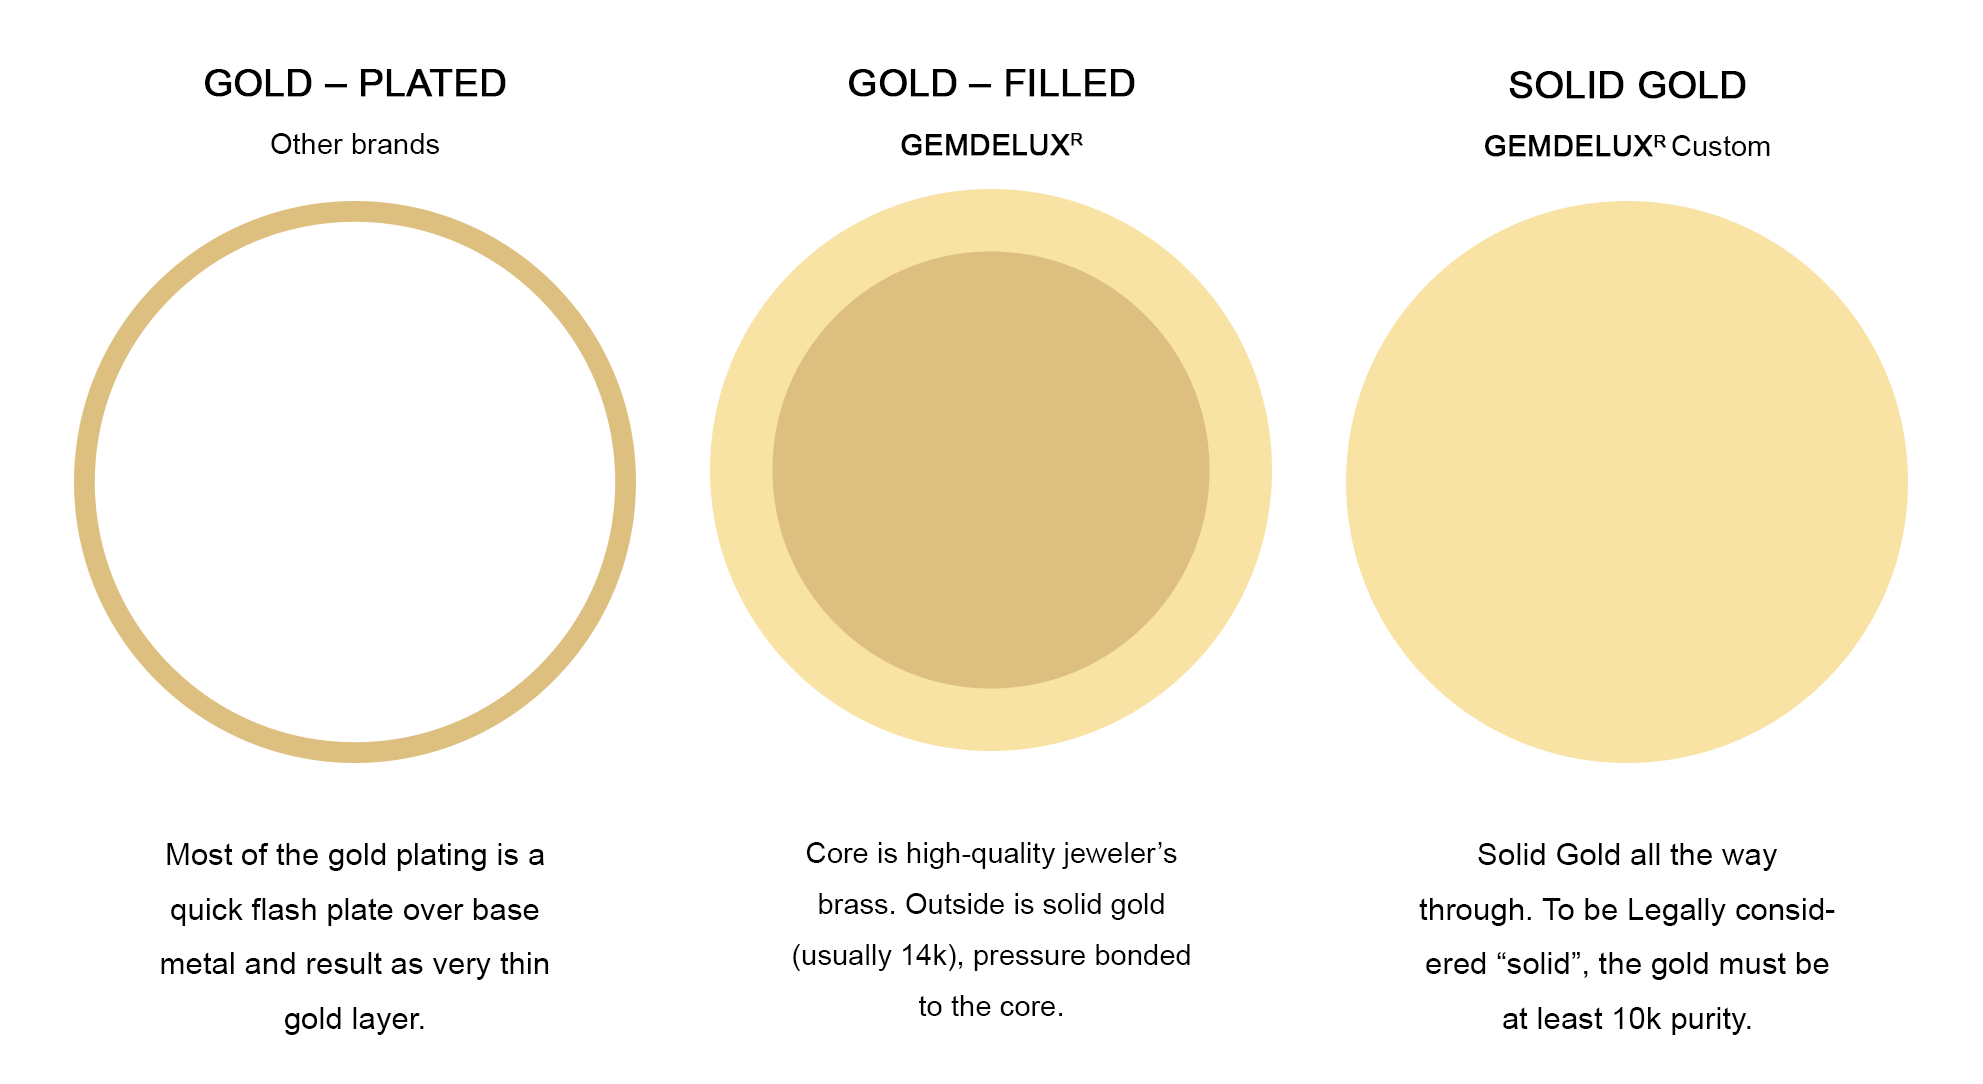 Difference Between Solid Gold, Gold Filled, and Gold Plated